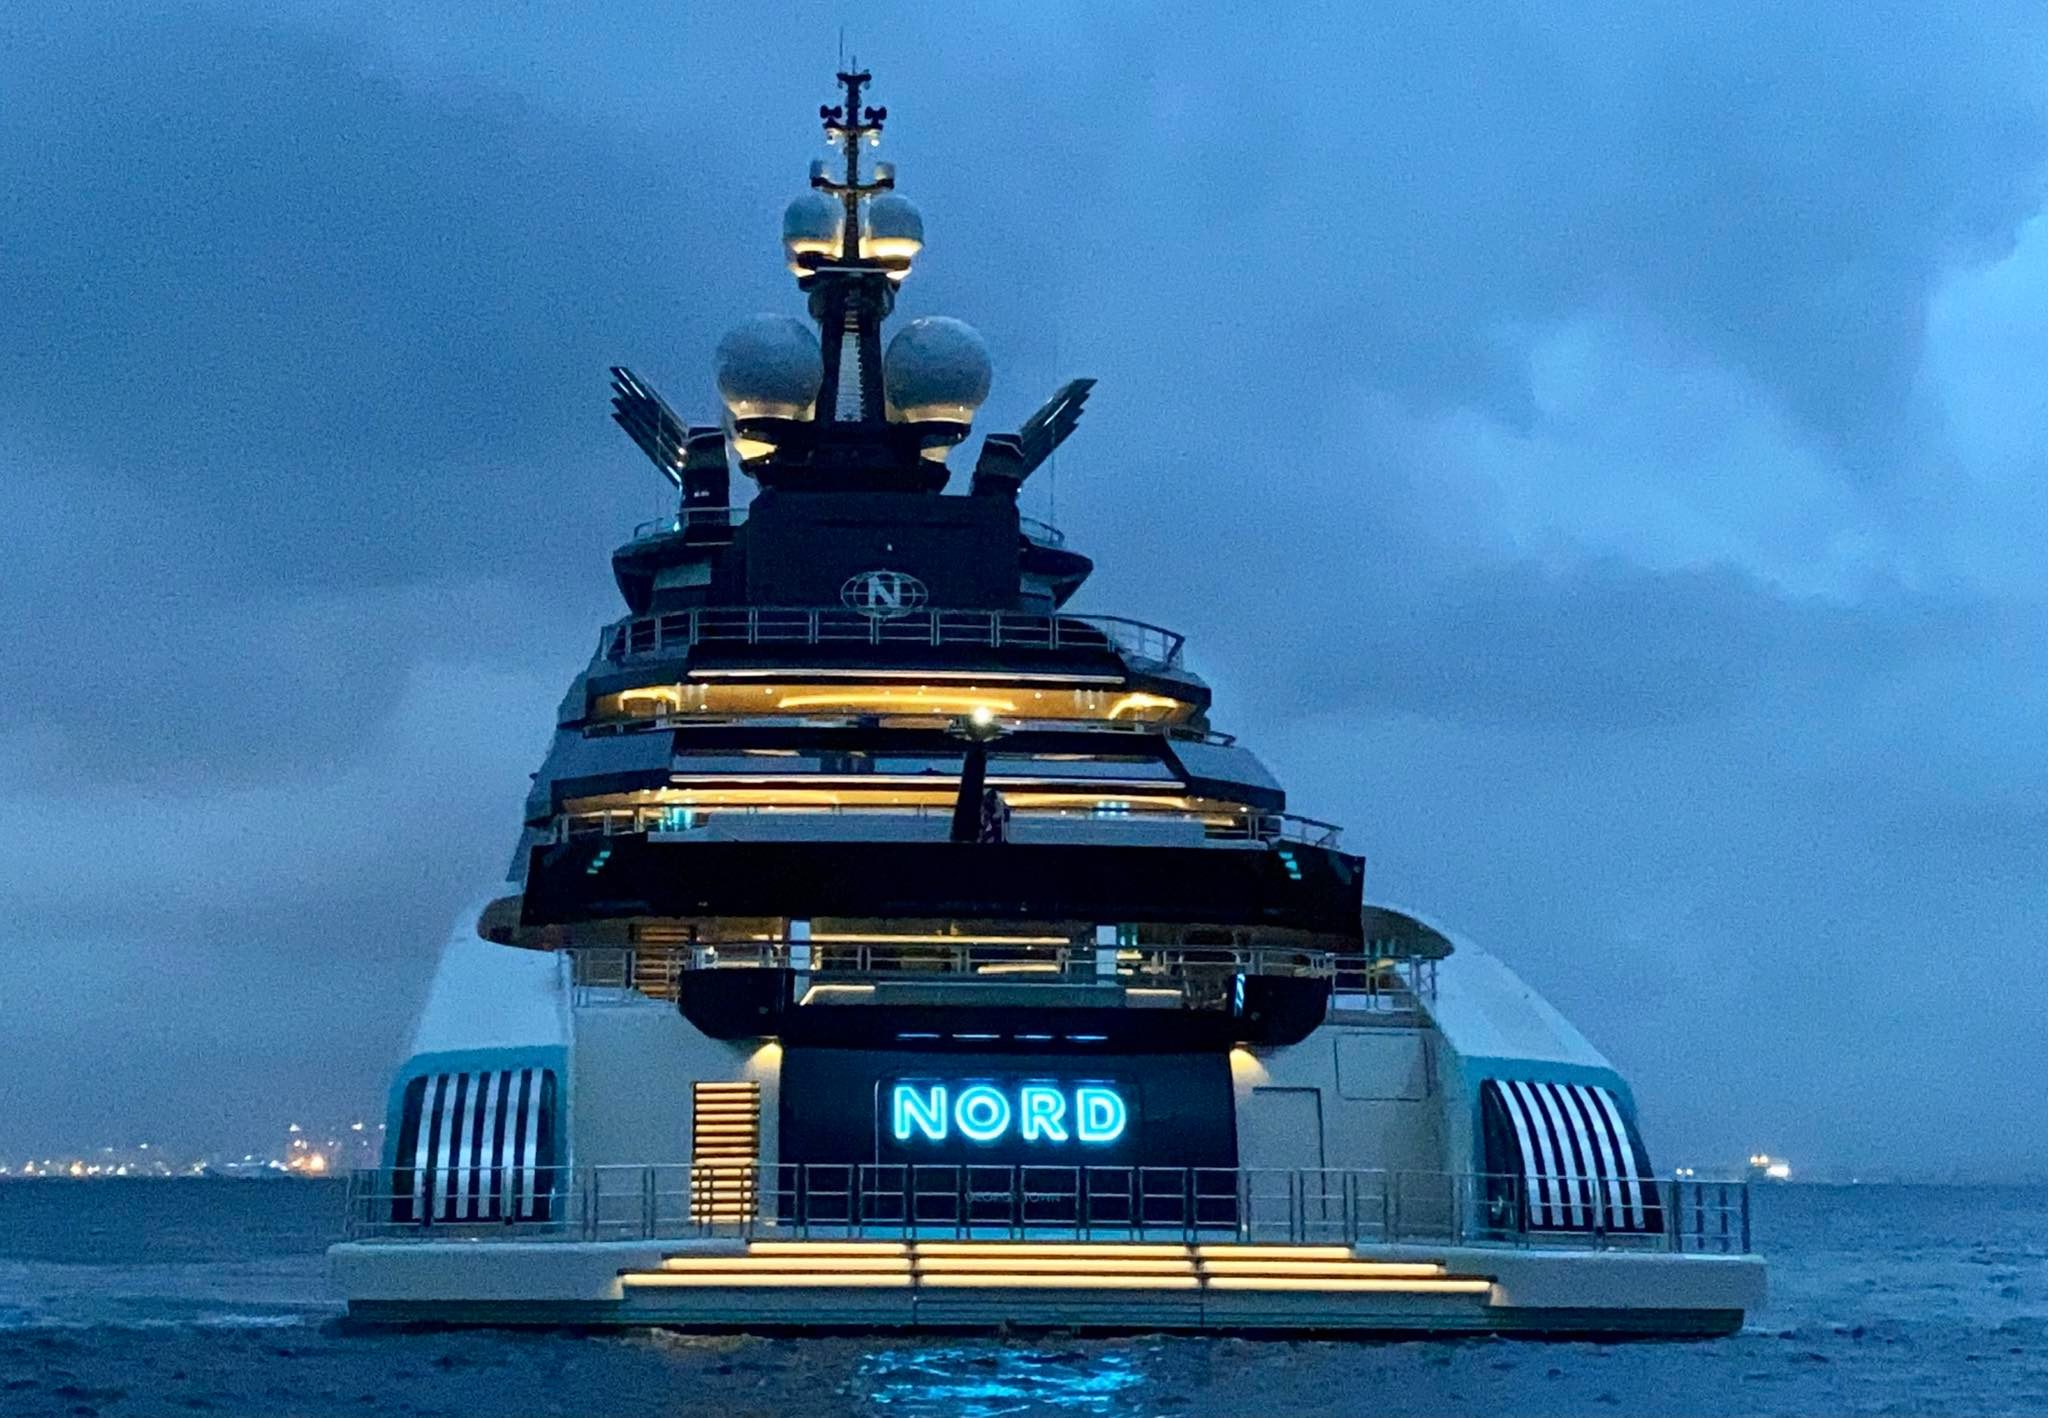 where is nord yacht